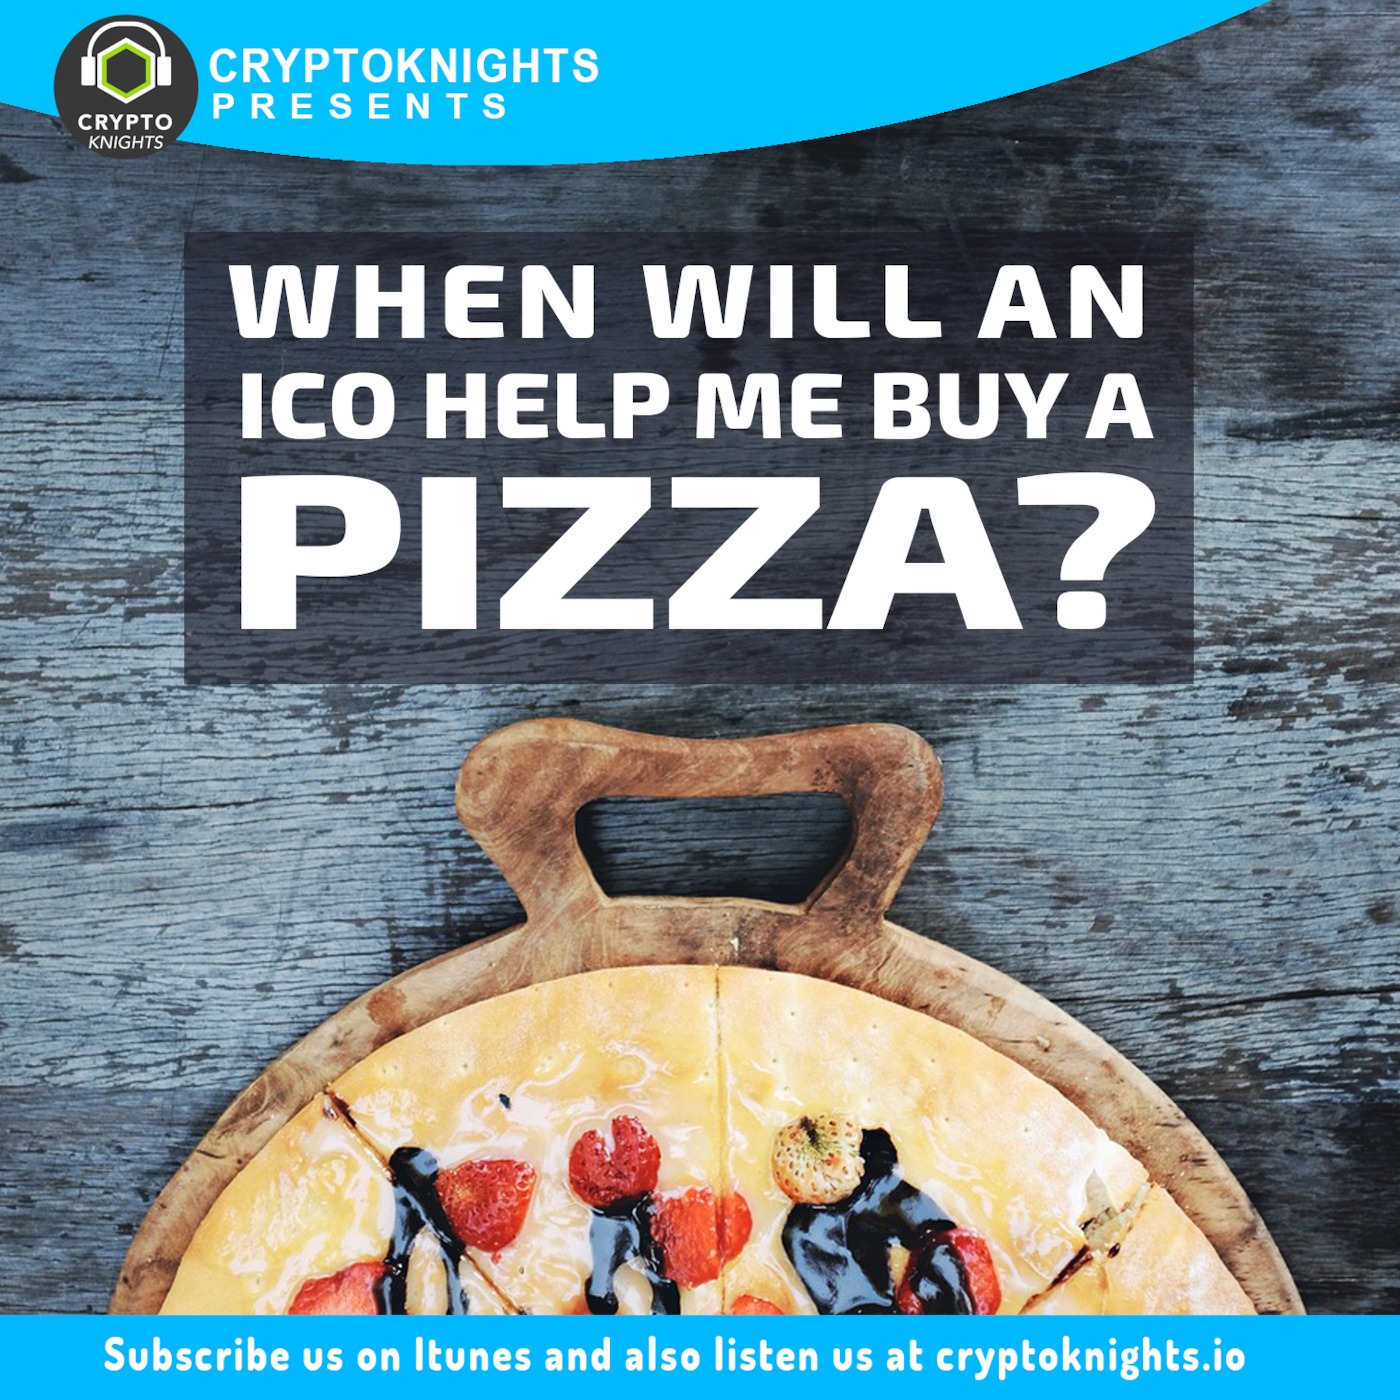 When will an ICO help me buy a pizza?